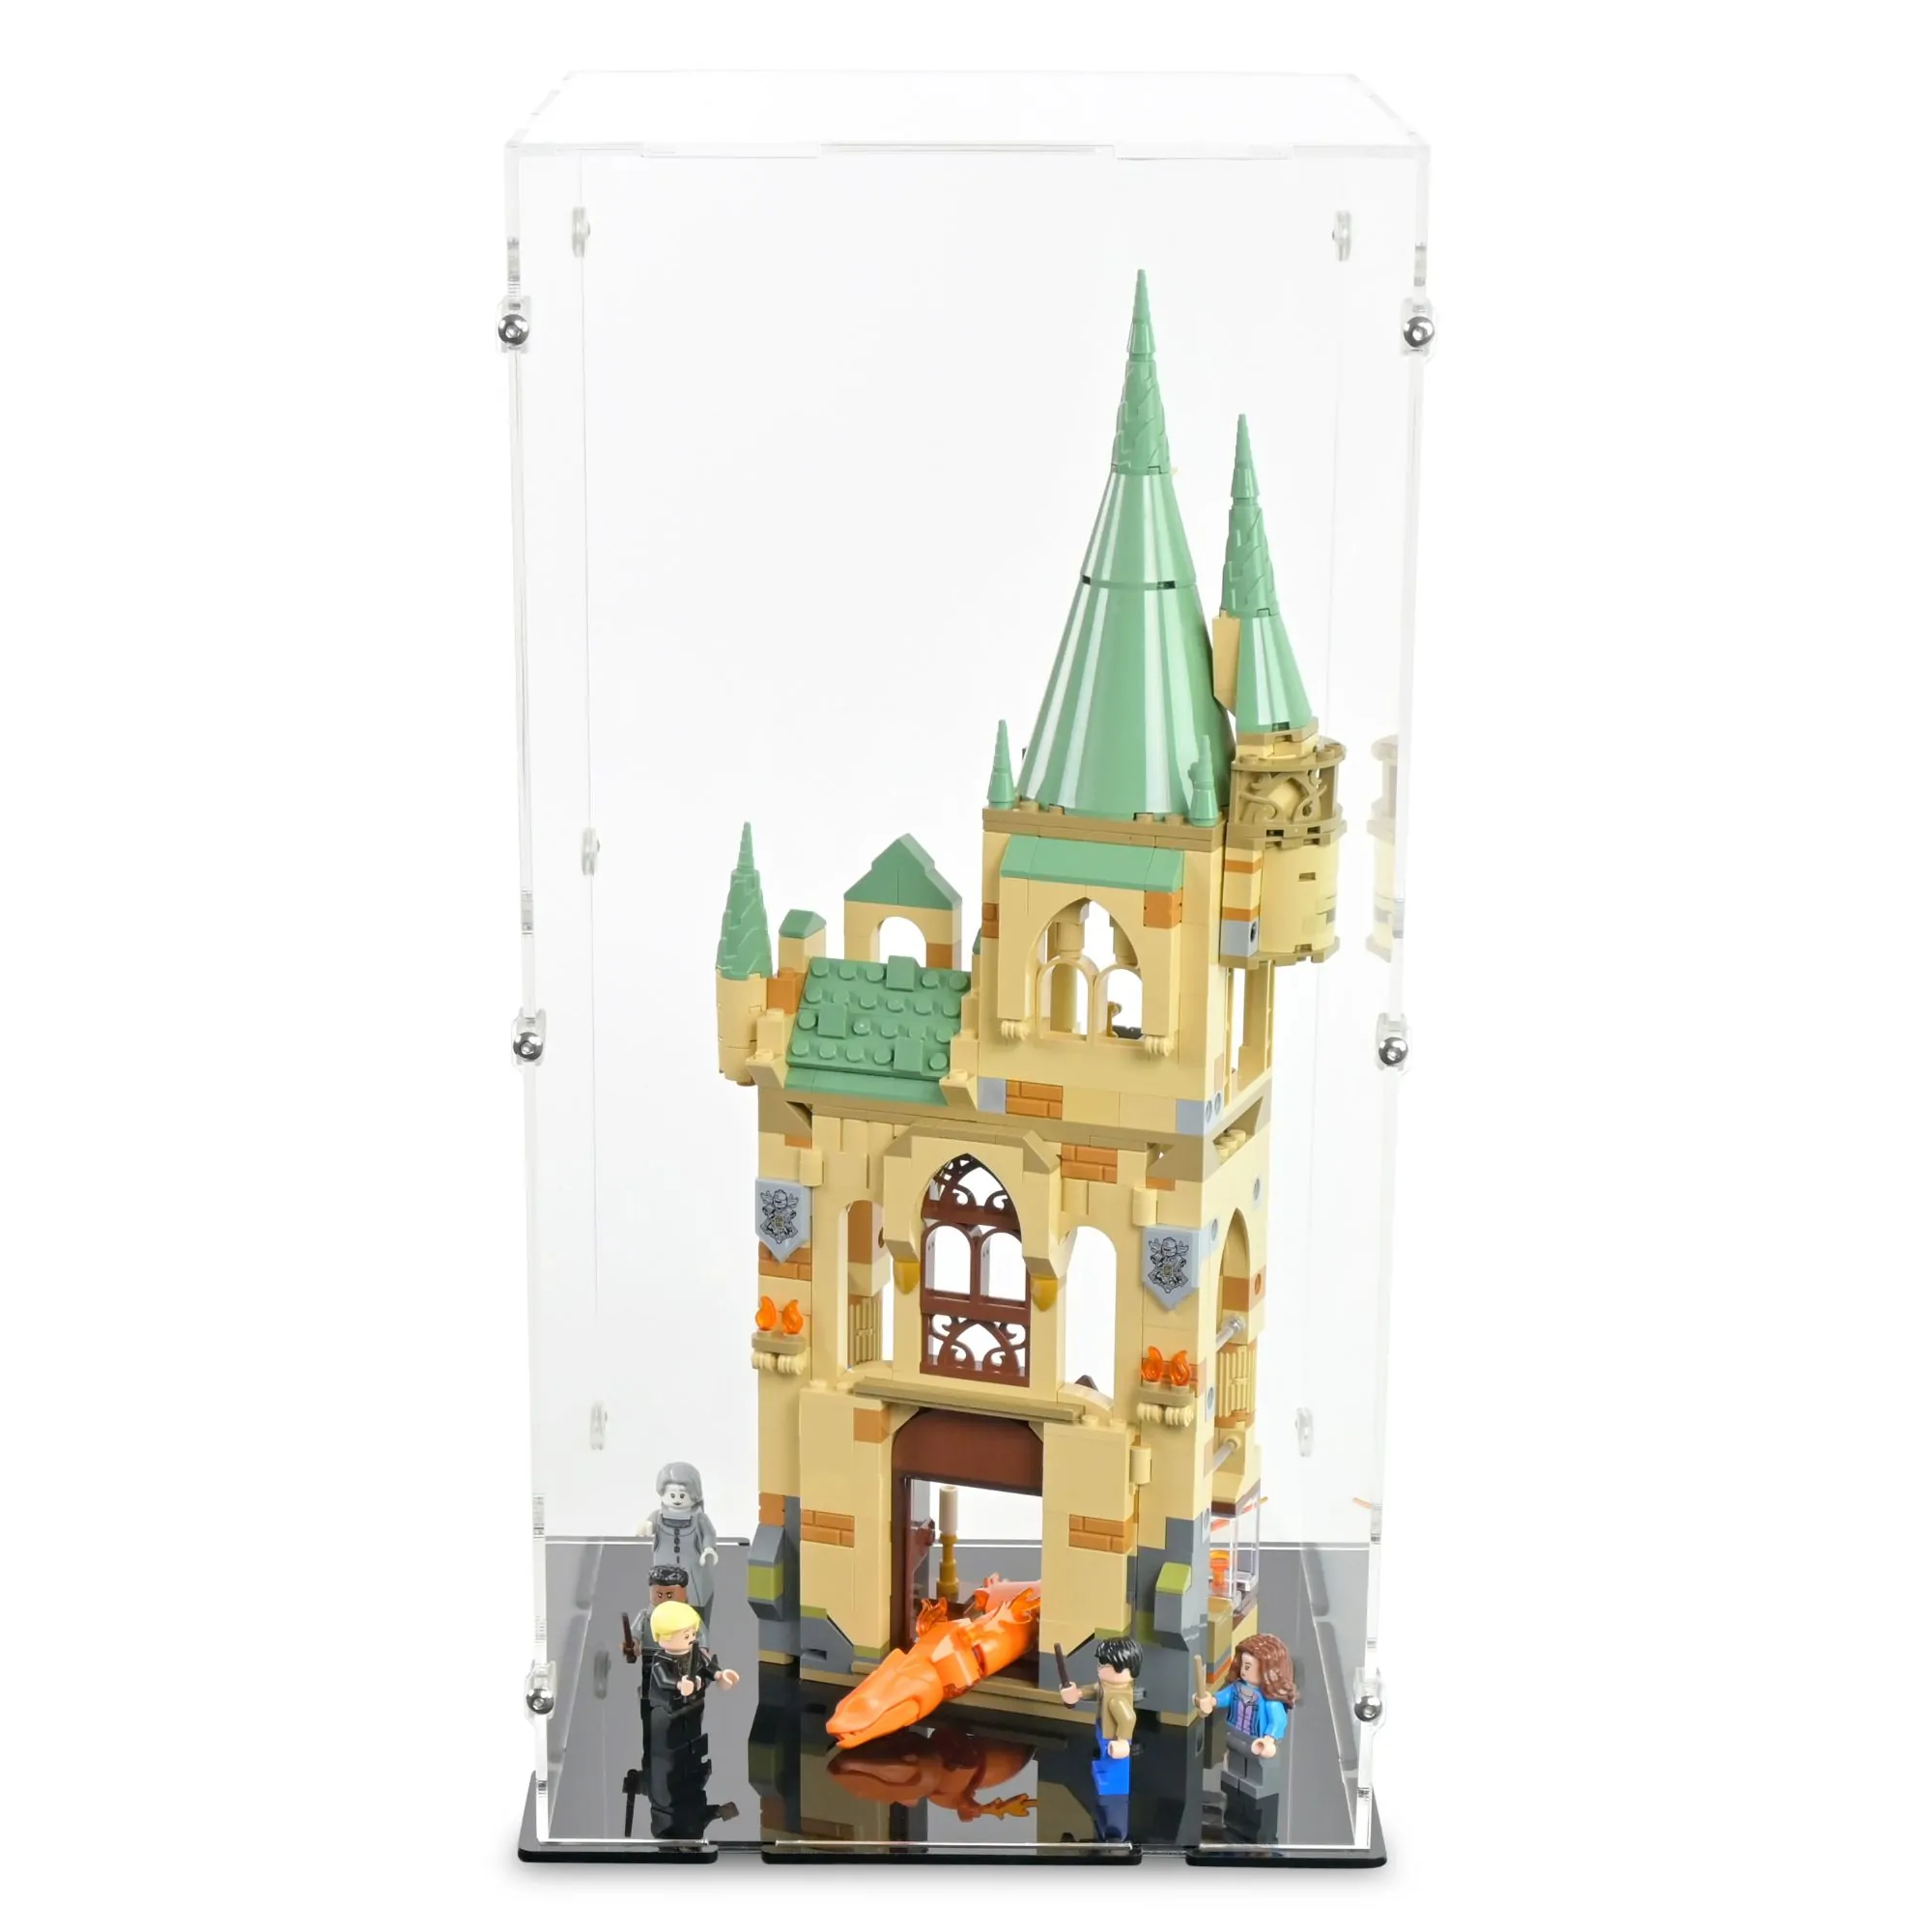 Siege Hick myg Acrylic Display Case for Hogwarts Room of Requirement | iDisplayit